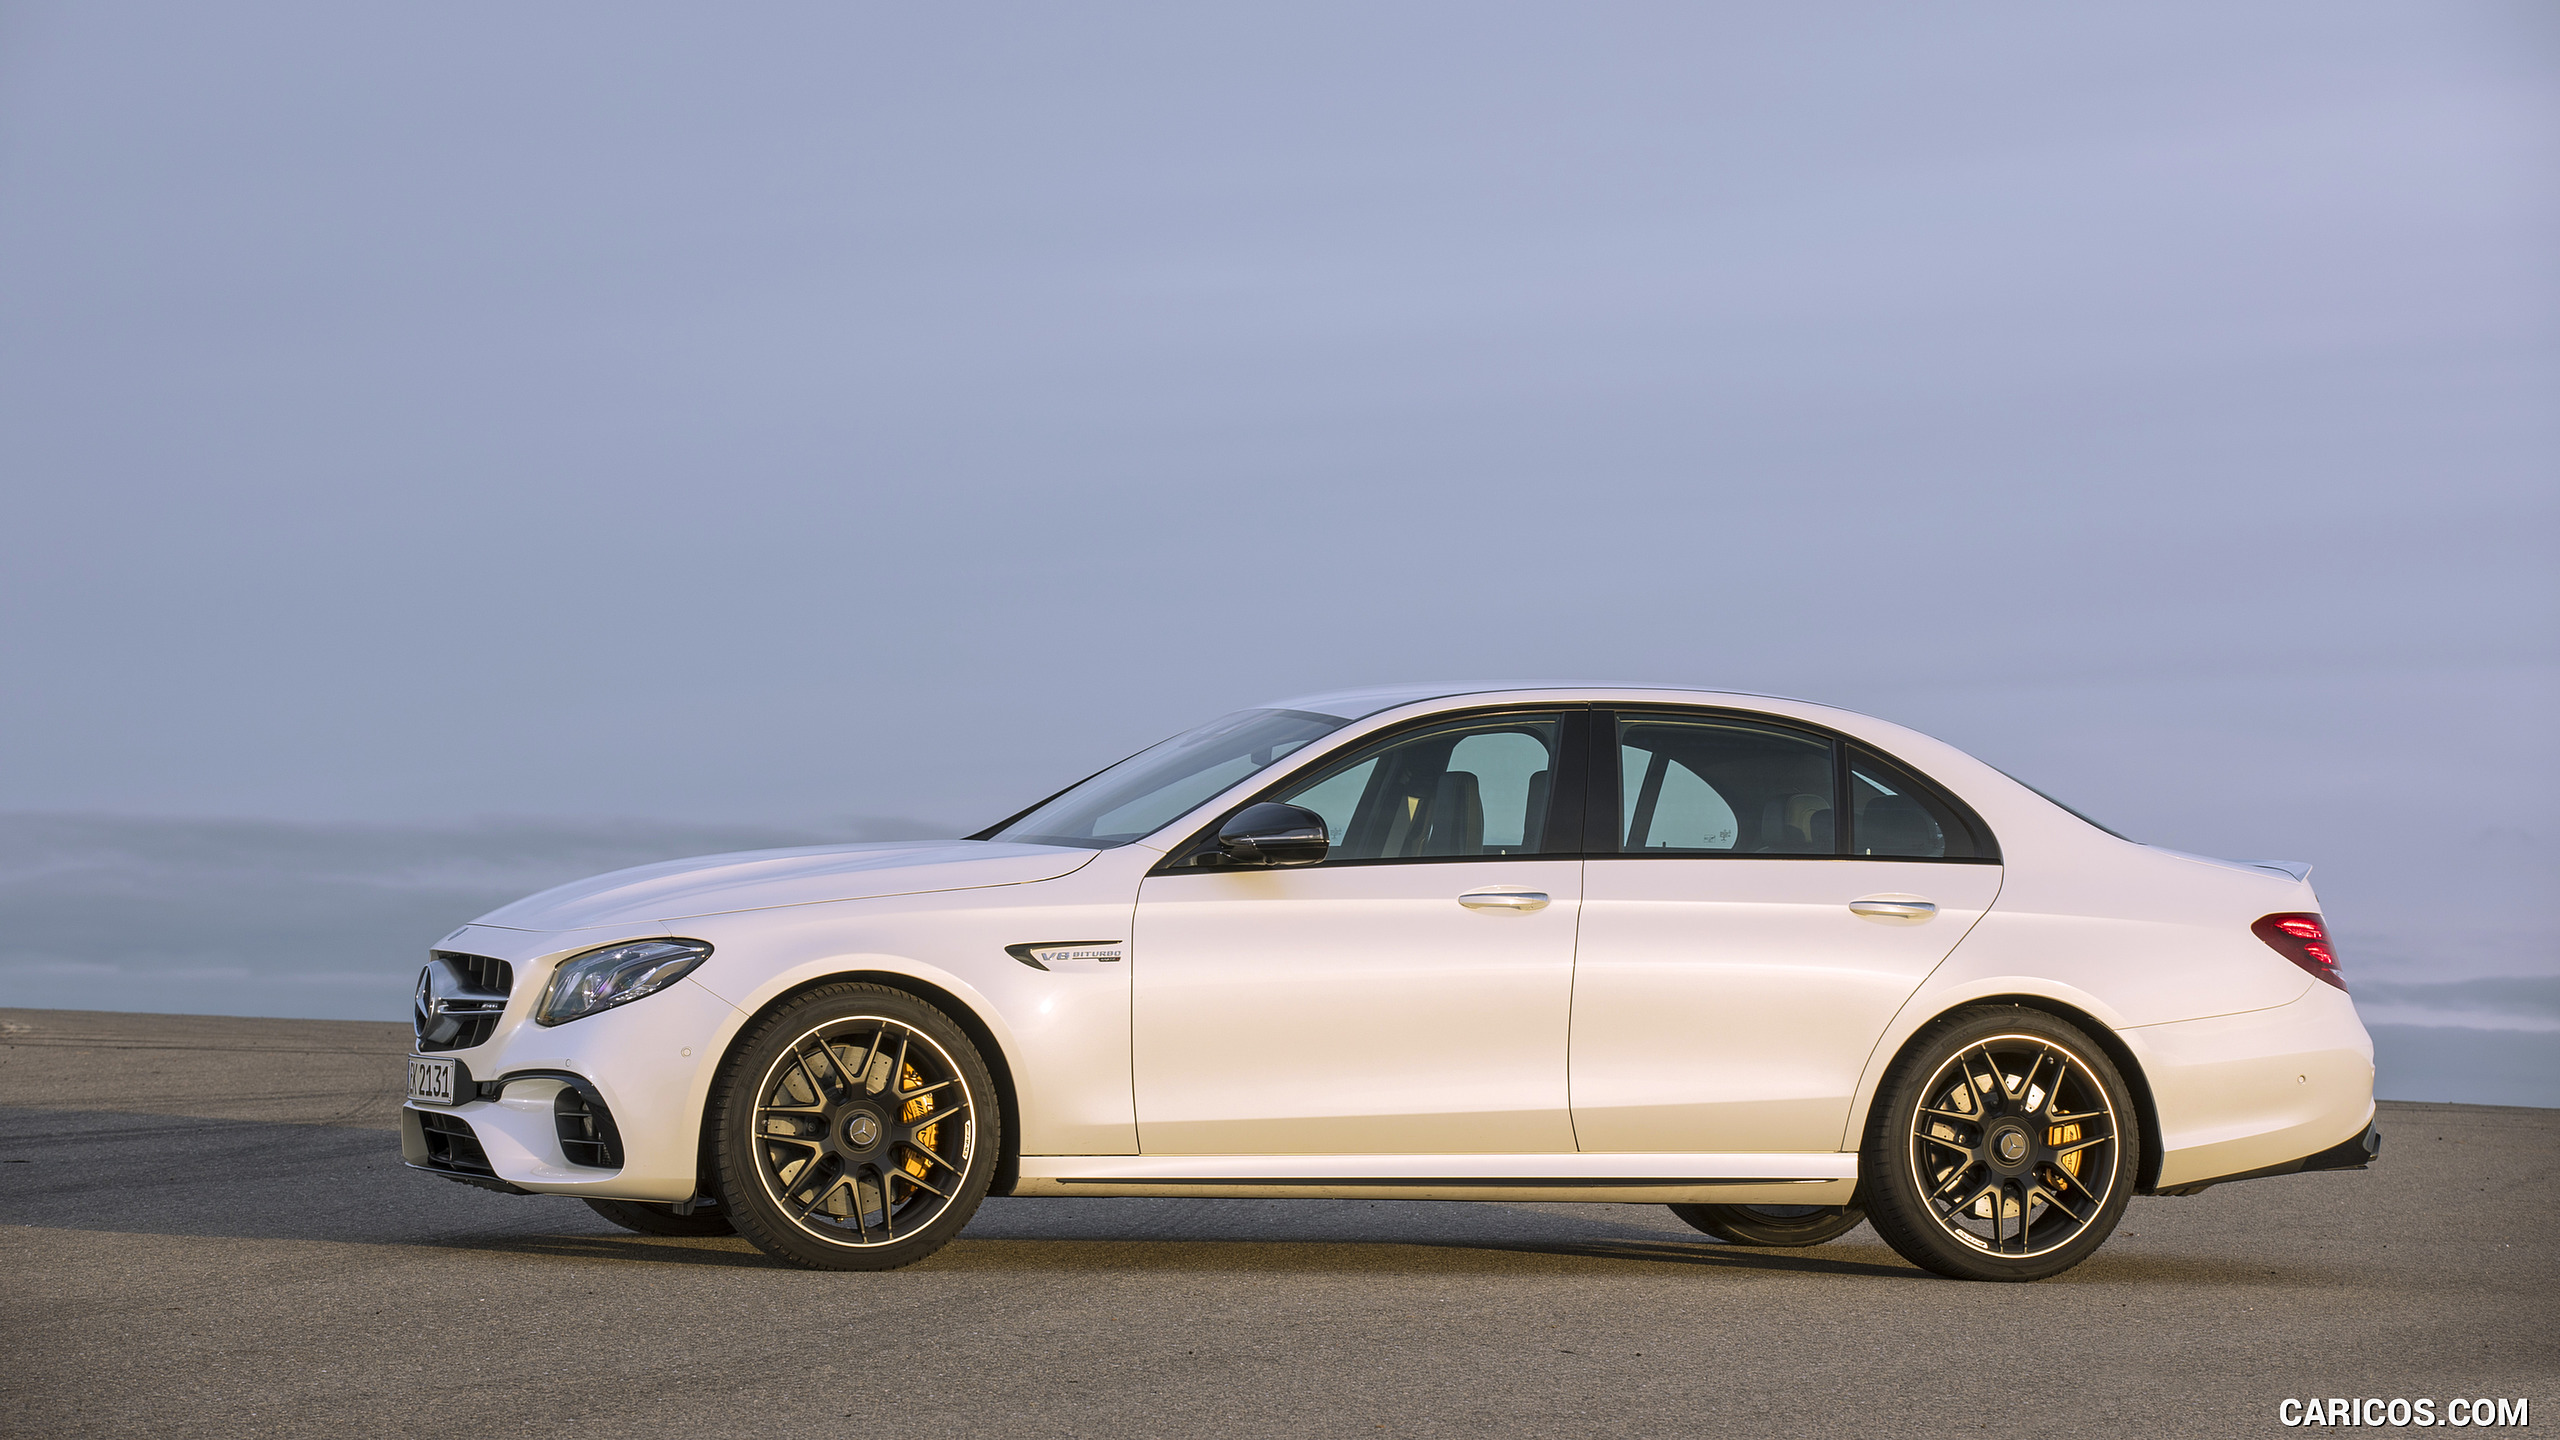 2018 Mercedes-AMG E63 S 4MATIC+ - Side, #124 of 323